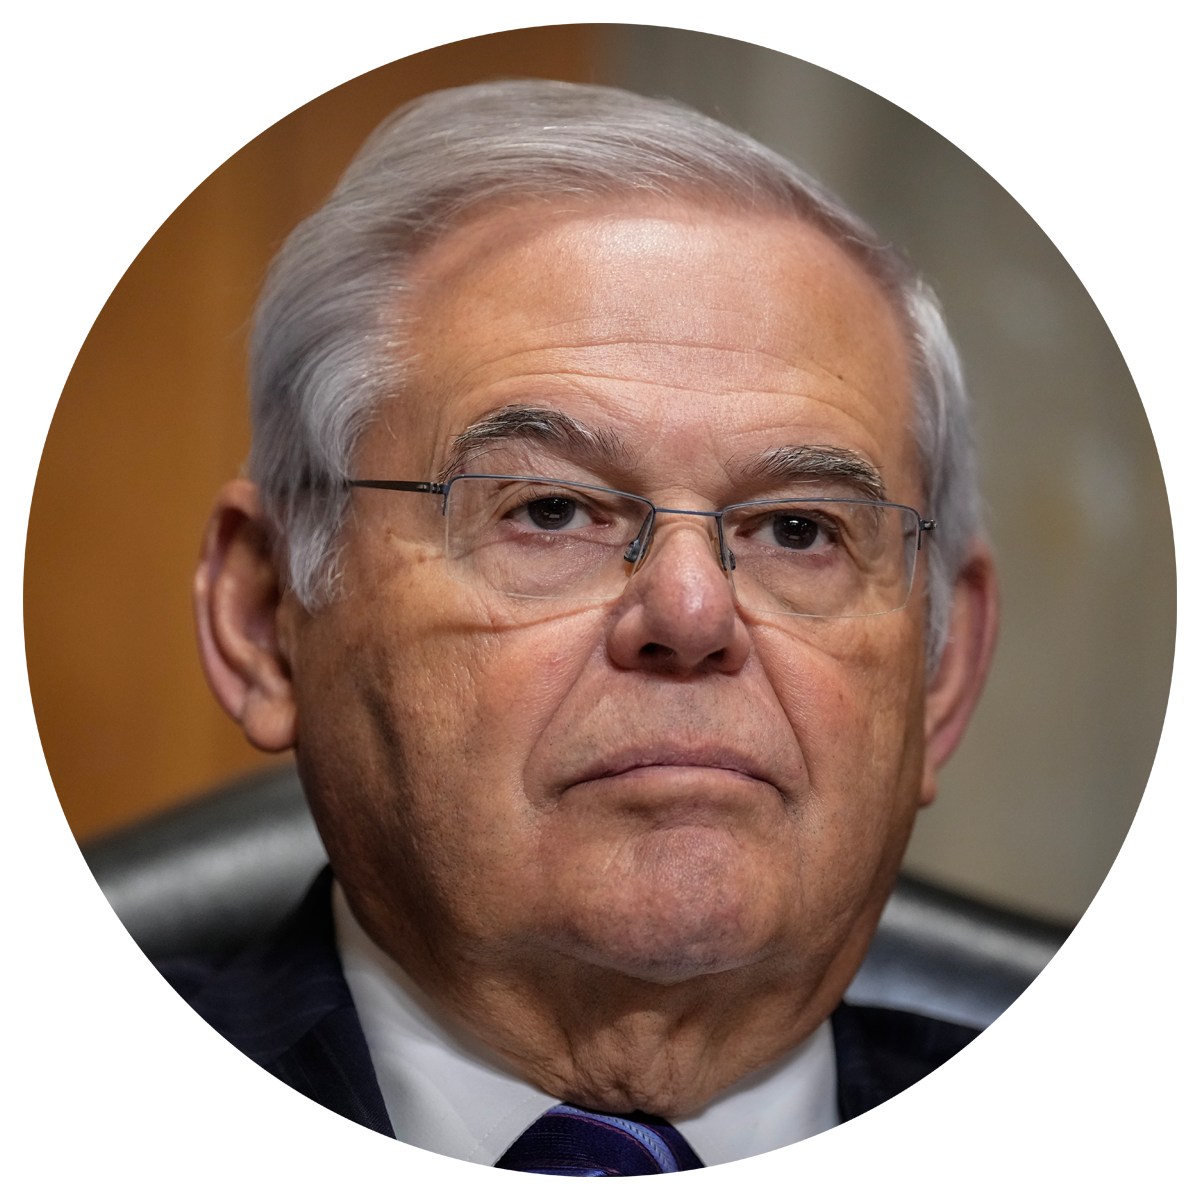 Bob Menendez, the New Jersey senator indicted in a corruption scandal